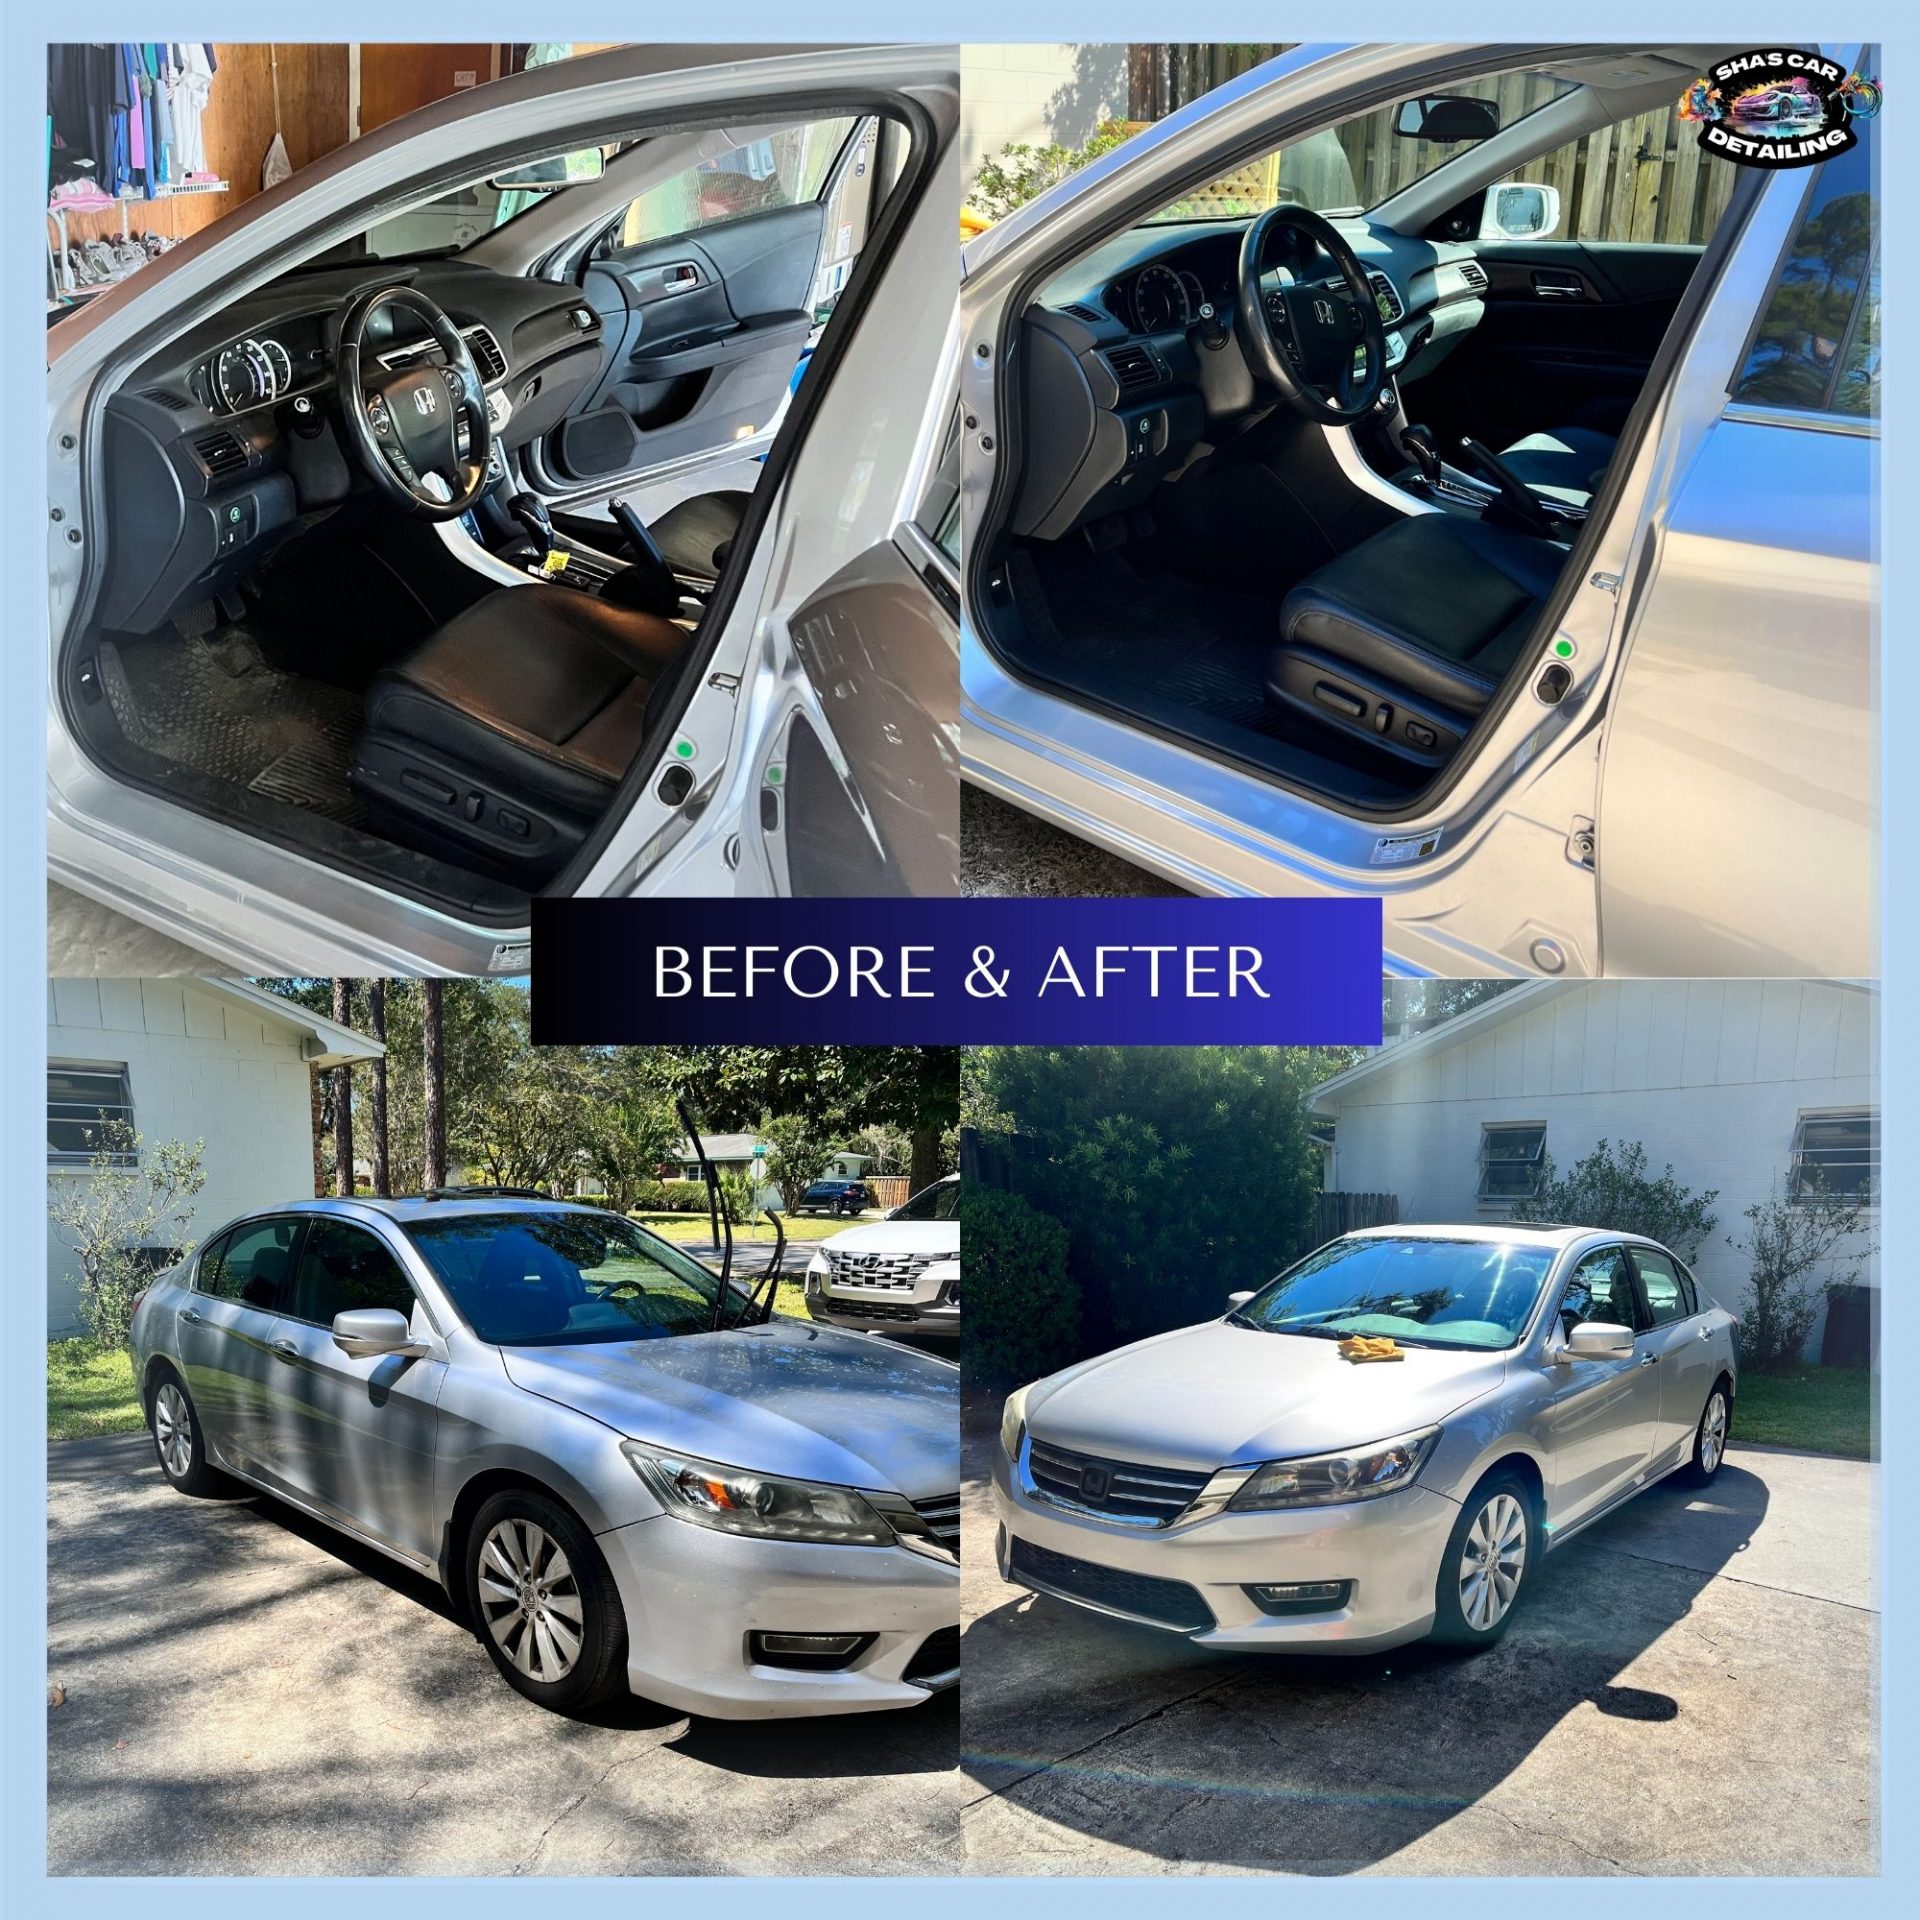 Premium full detail before and after pictures